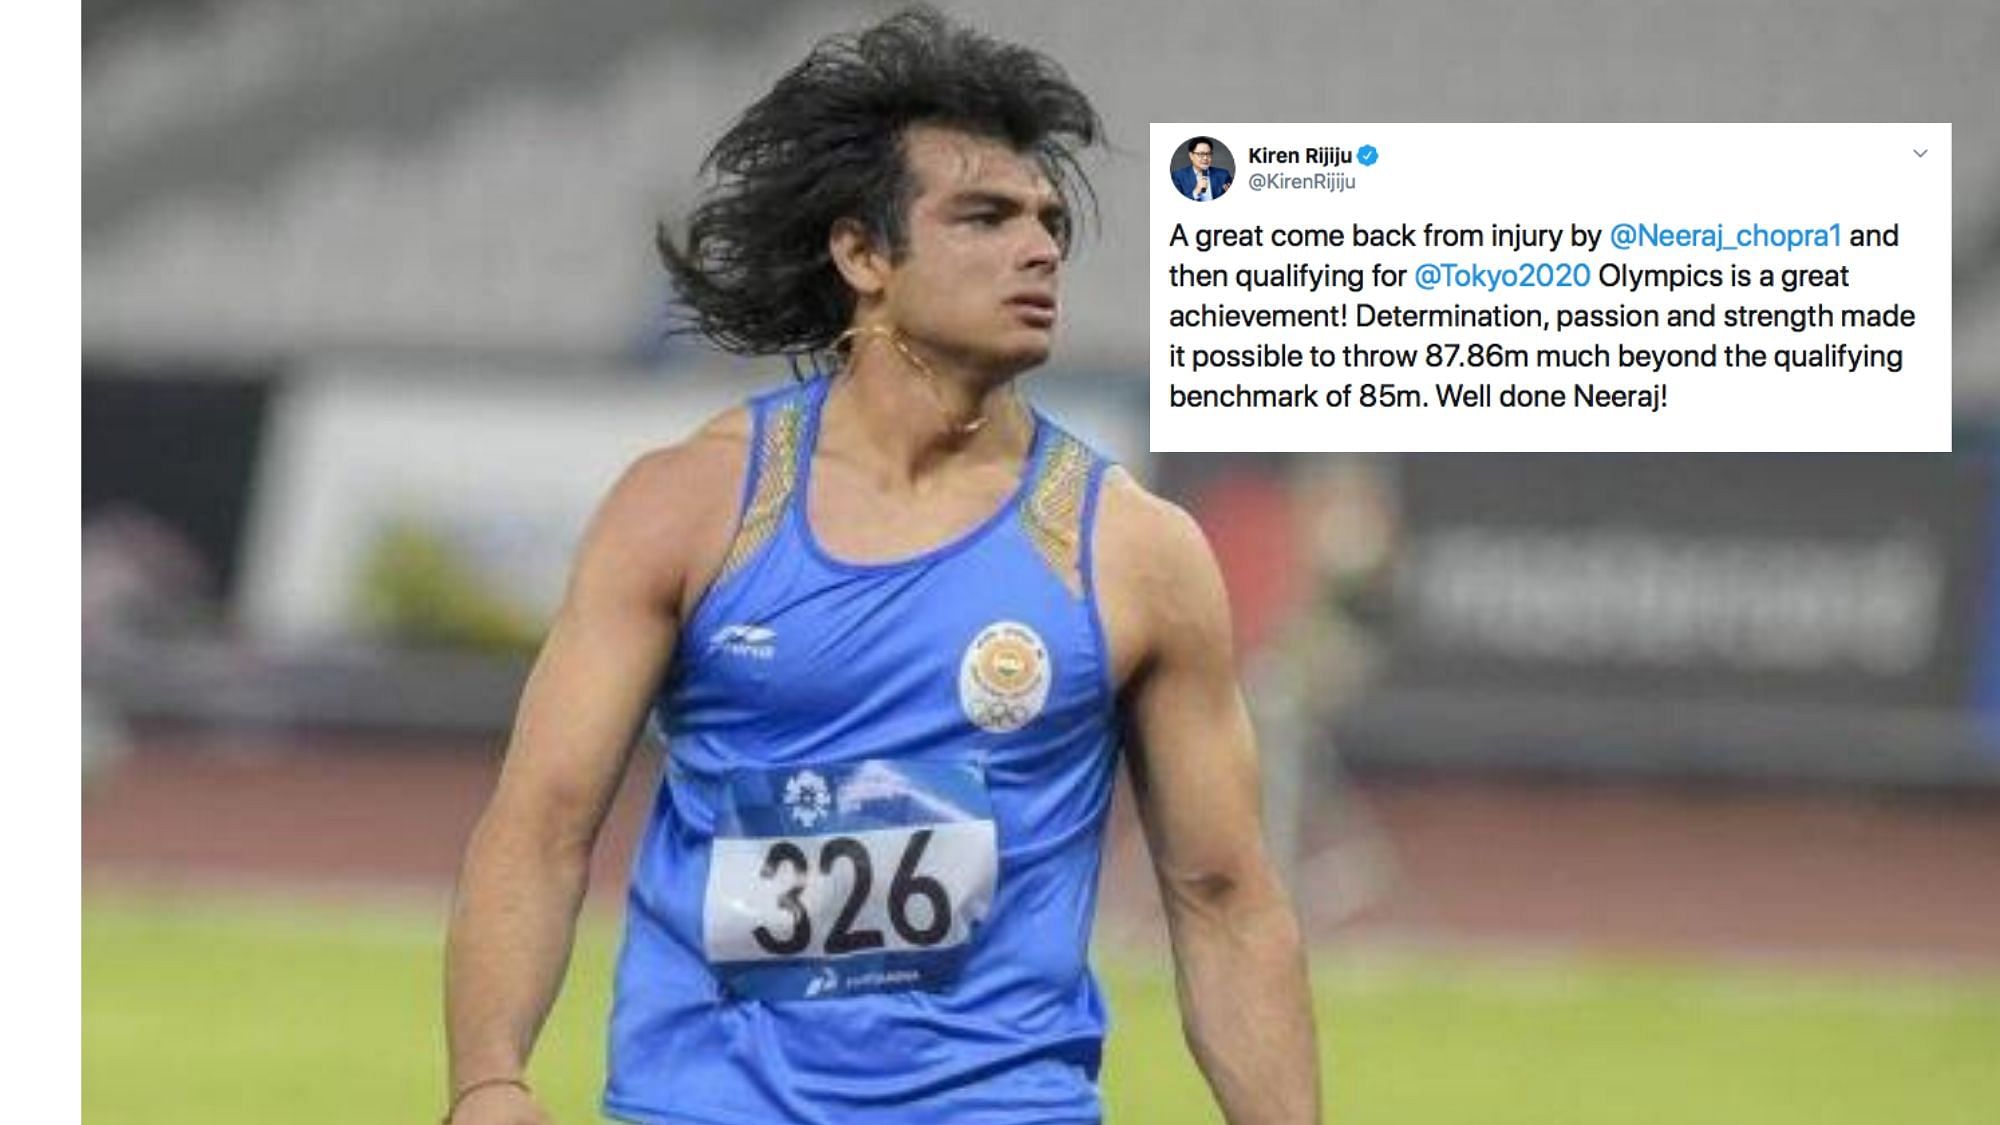 Sports Minister Kiren Rijiju on Wednesday, 29 January congratulated country’s ace javelin thrower Neeraj Chopra as he qualified for the Tokyo 2020 Olympics with a throw of 87.86m at the Athletics Central North East meeting in South Africa.